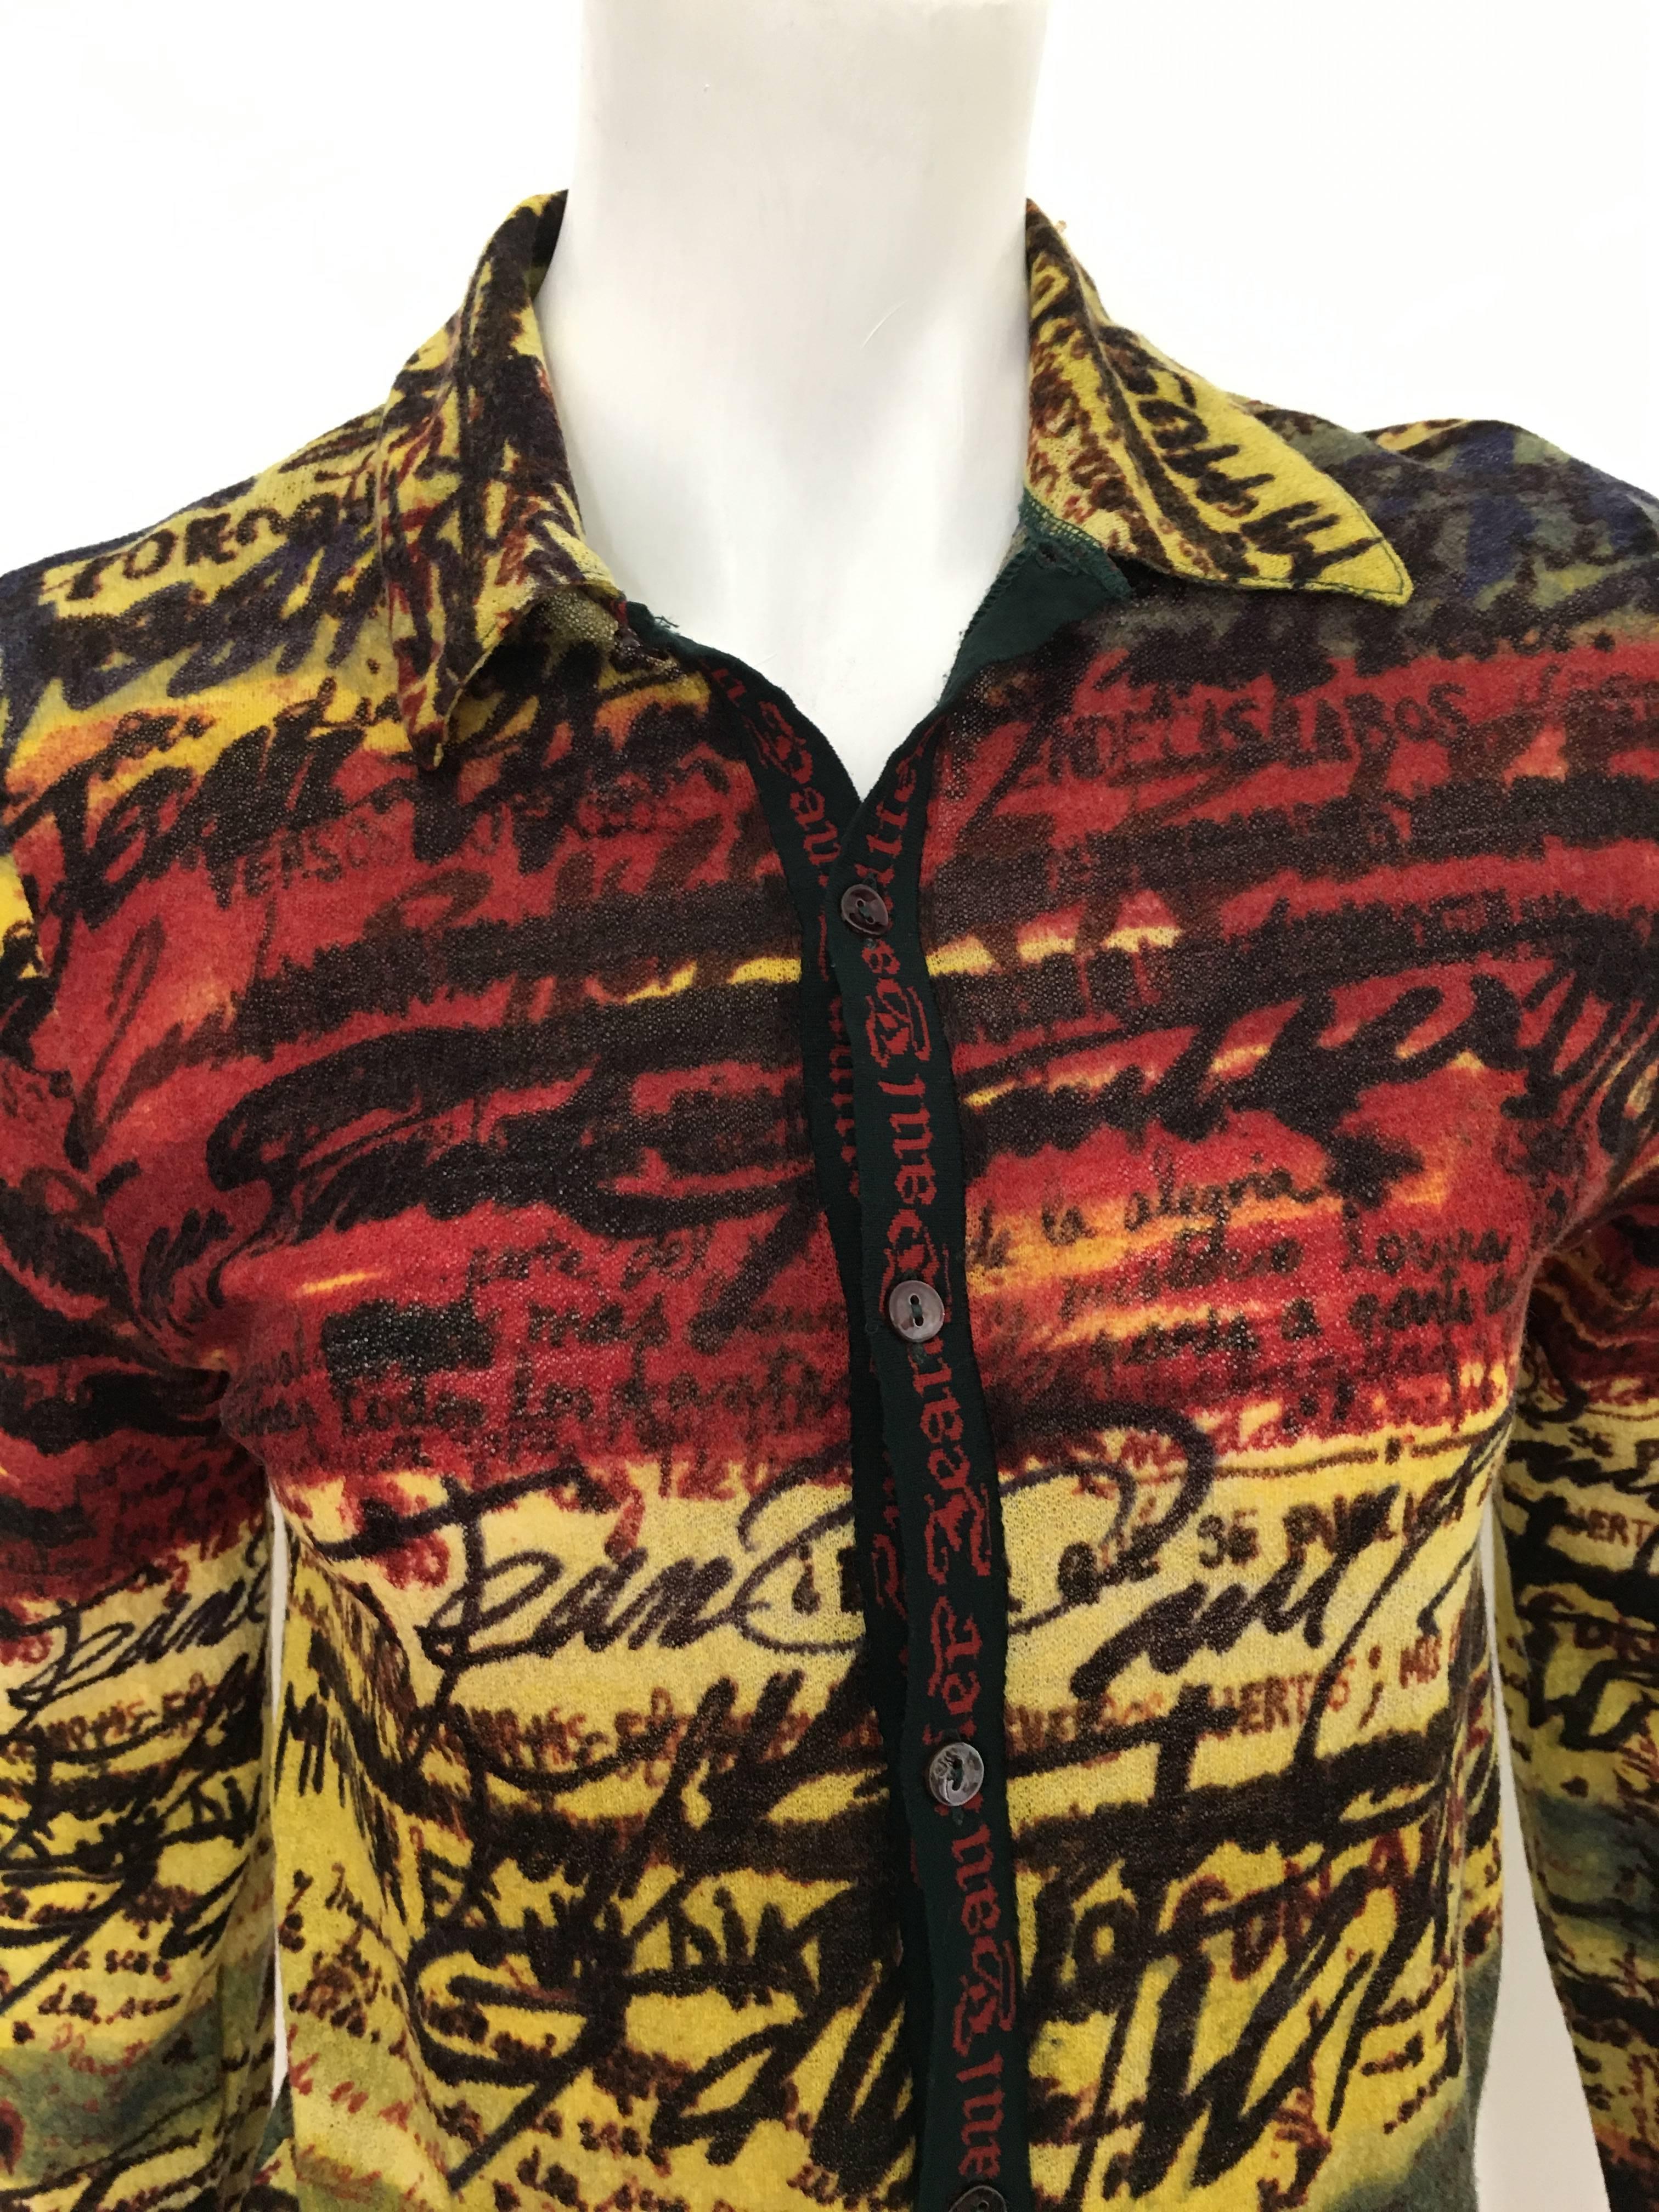 Jean Paul Gaultier Maille Classique 2000s mens knit wool button up shirt is a size small.  This is a perfect example of a unisex shirt, both sexes should be able to enjoy this and wear it with style.
Measurements are:
32